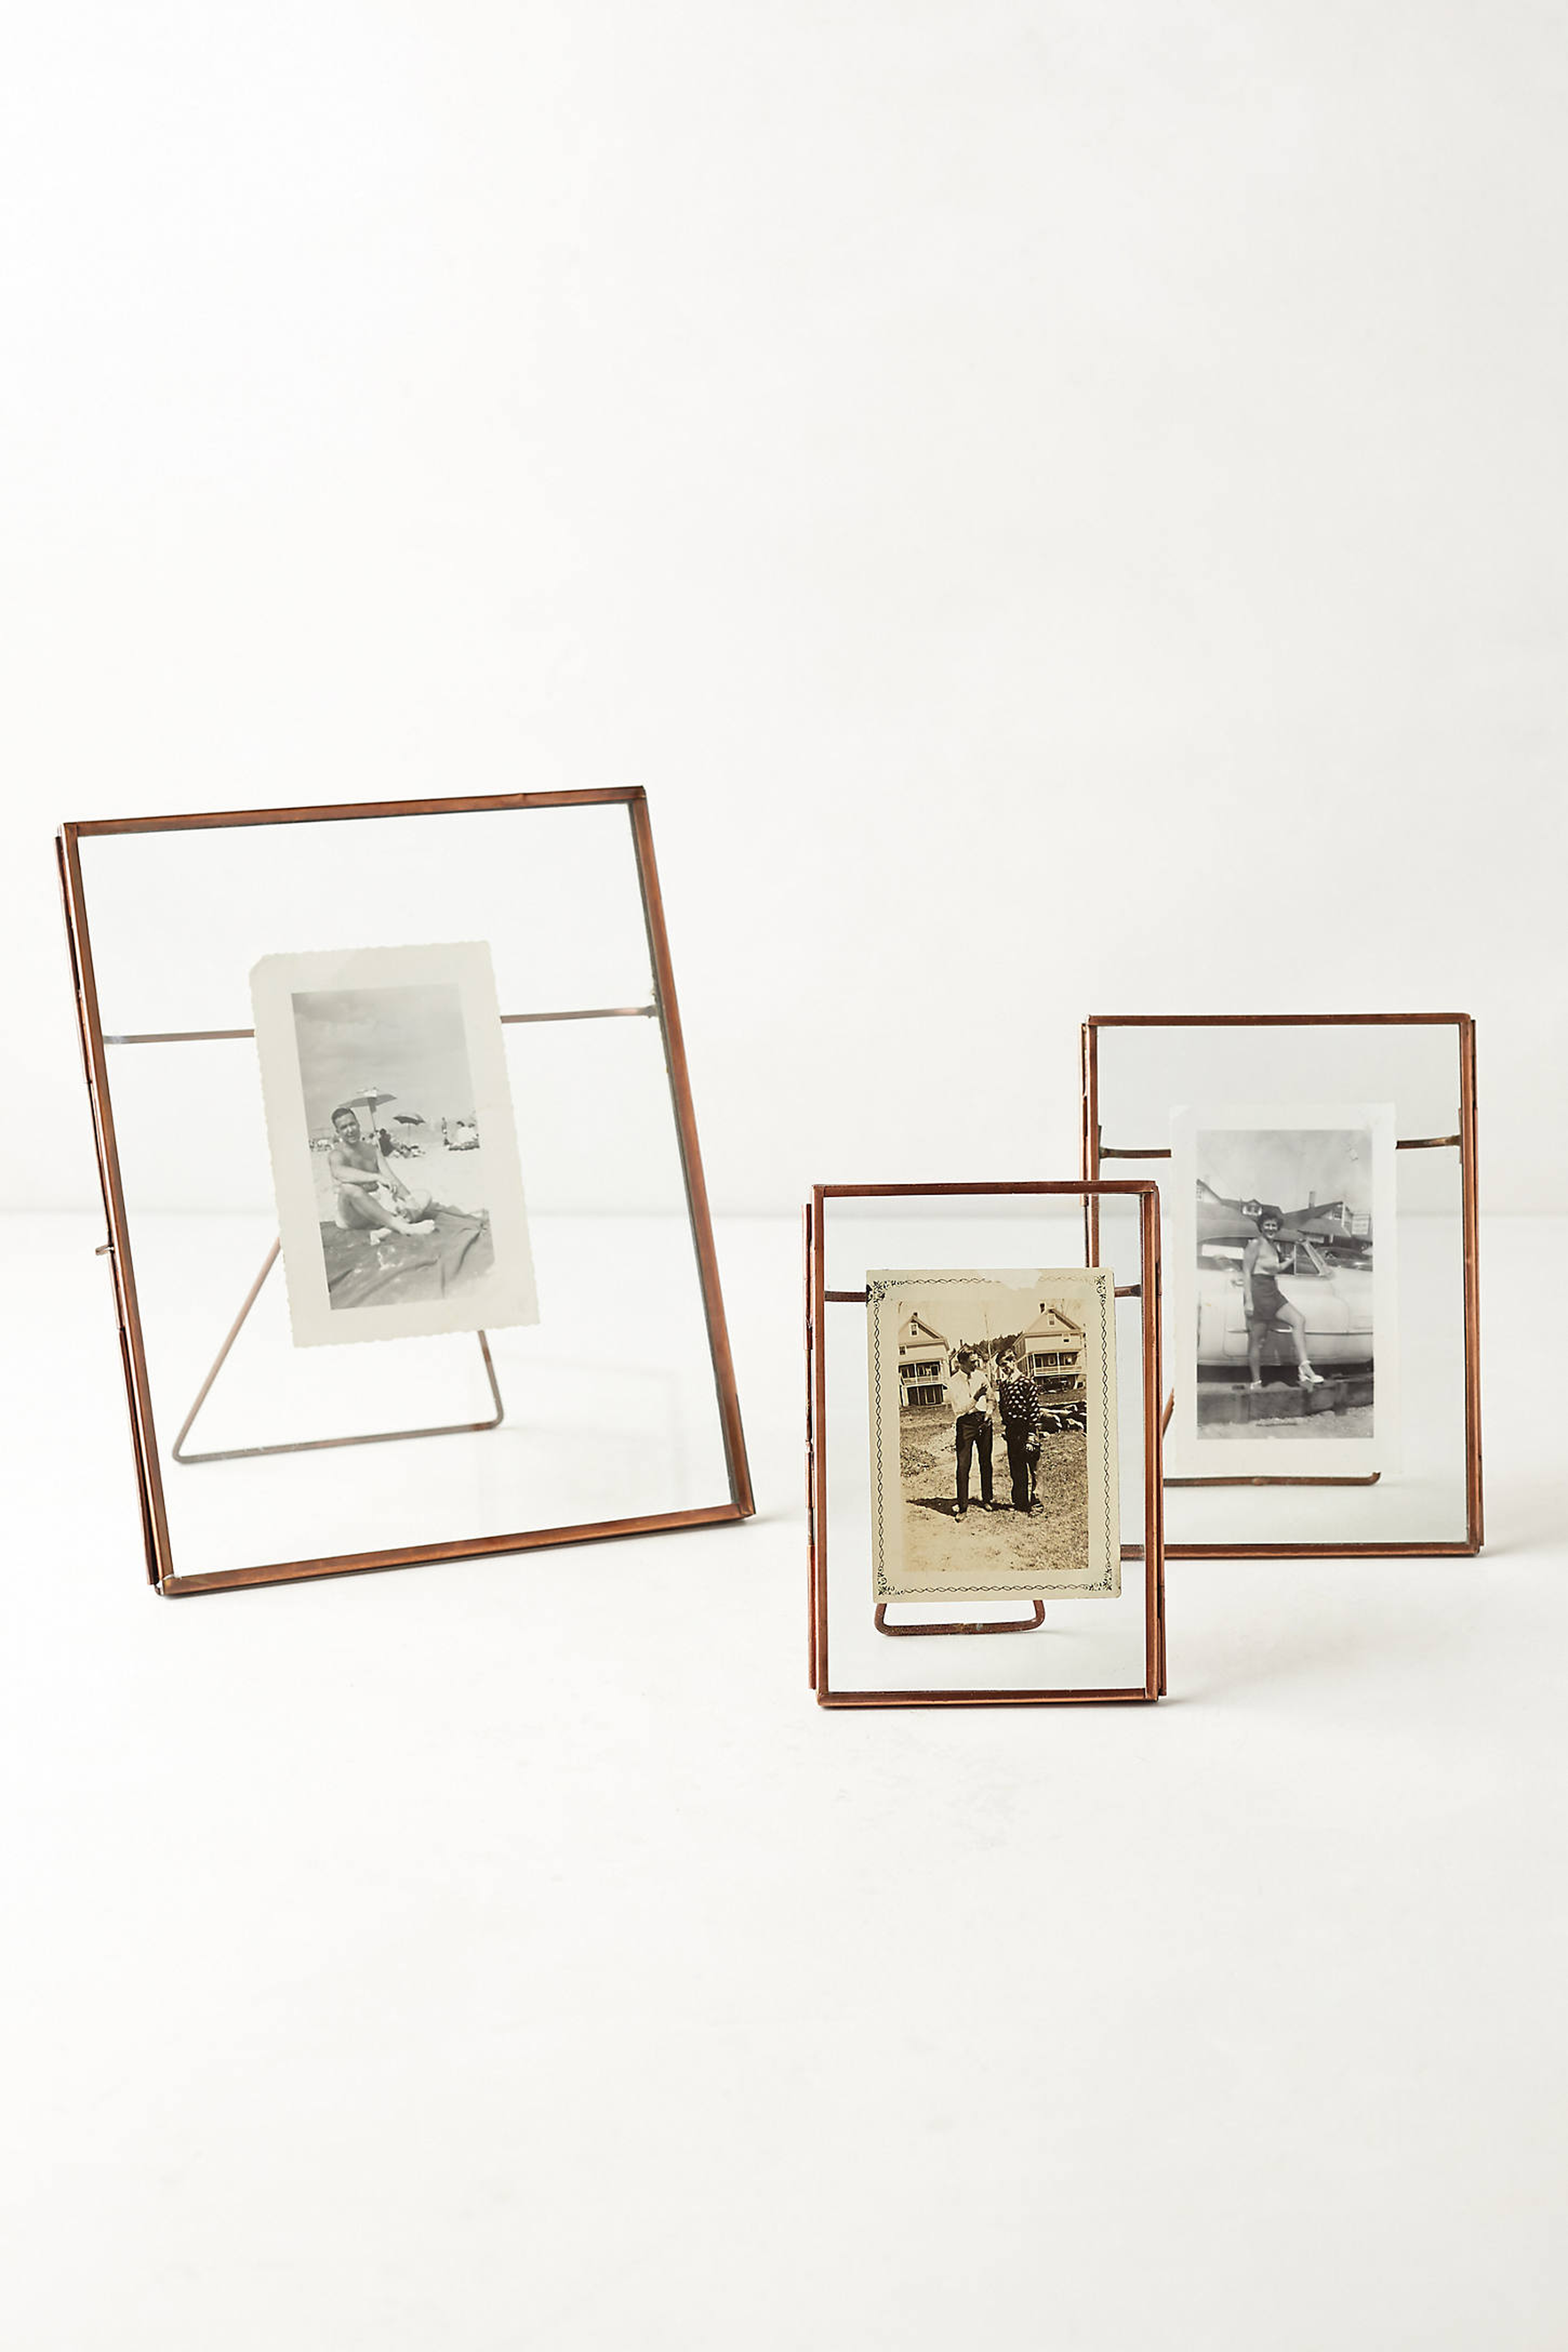 Pressed Glass Photo Frame By Anthropologie in Brown Size 4 X 6 - Anthropologie